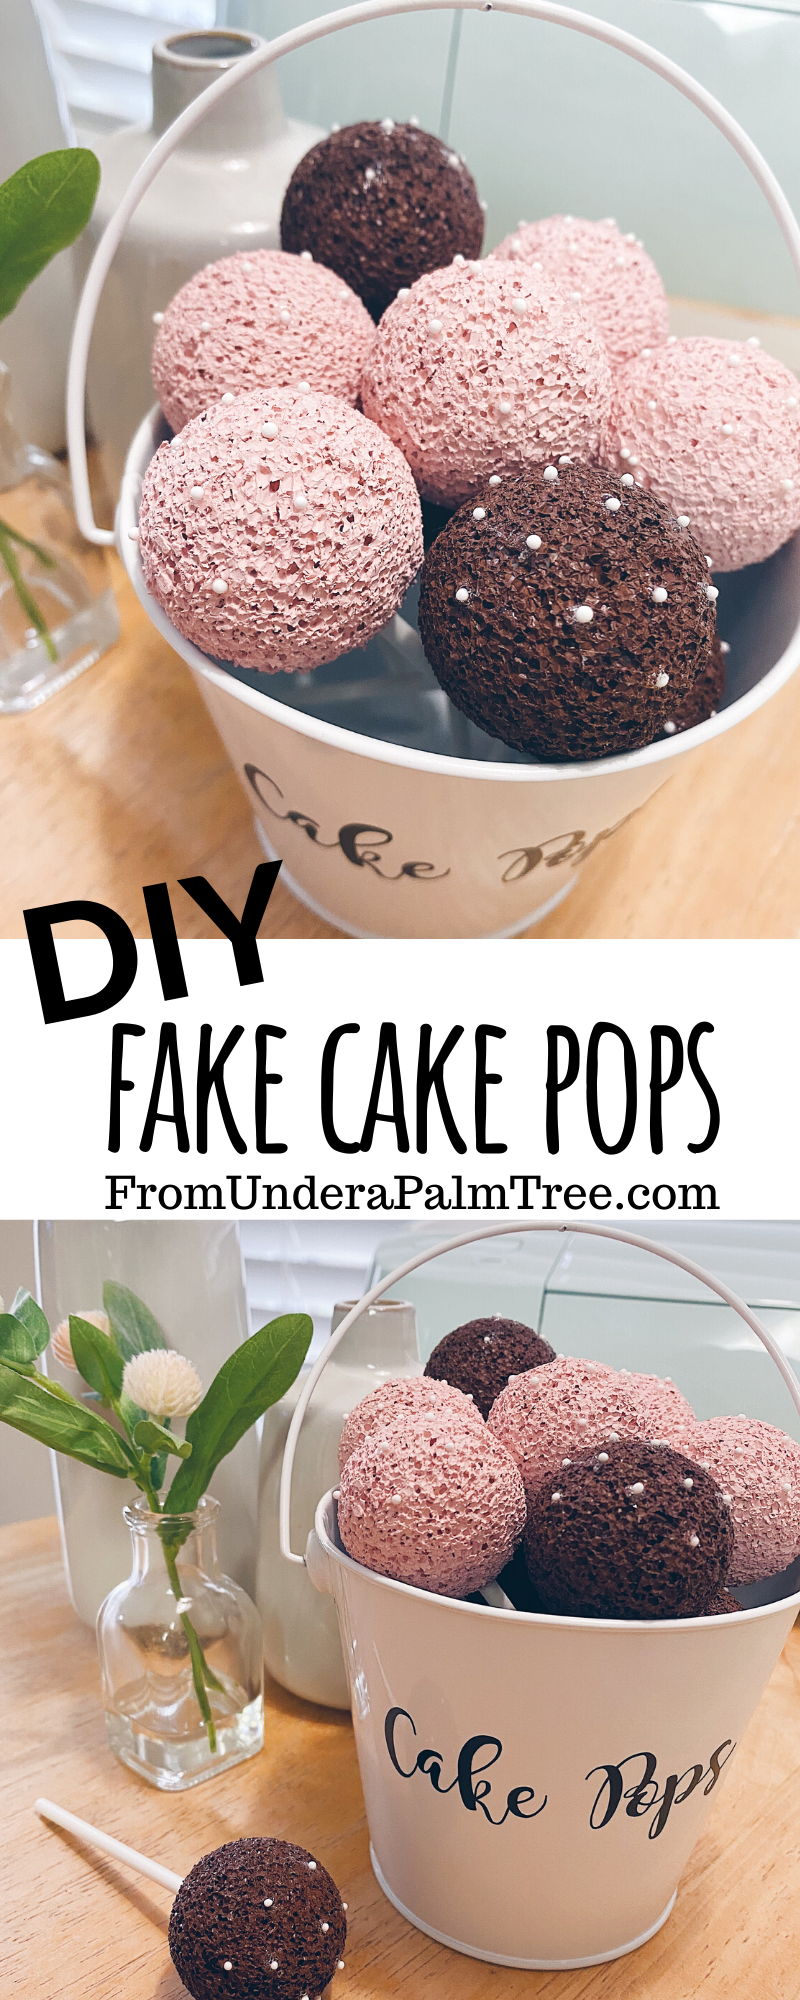 DIY cake pops | DIY play food | play food for preschoolers | mom project | how to make fake cake pops | imagination play for kids | preschool play | preschool activities | play kitchen ideas | play food |